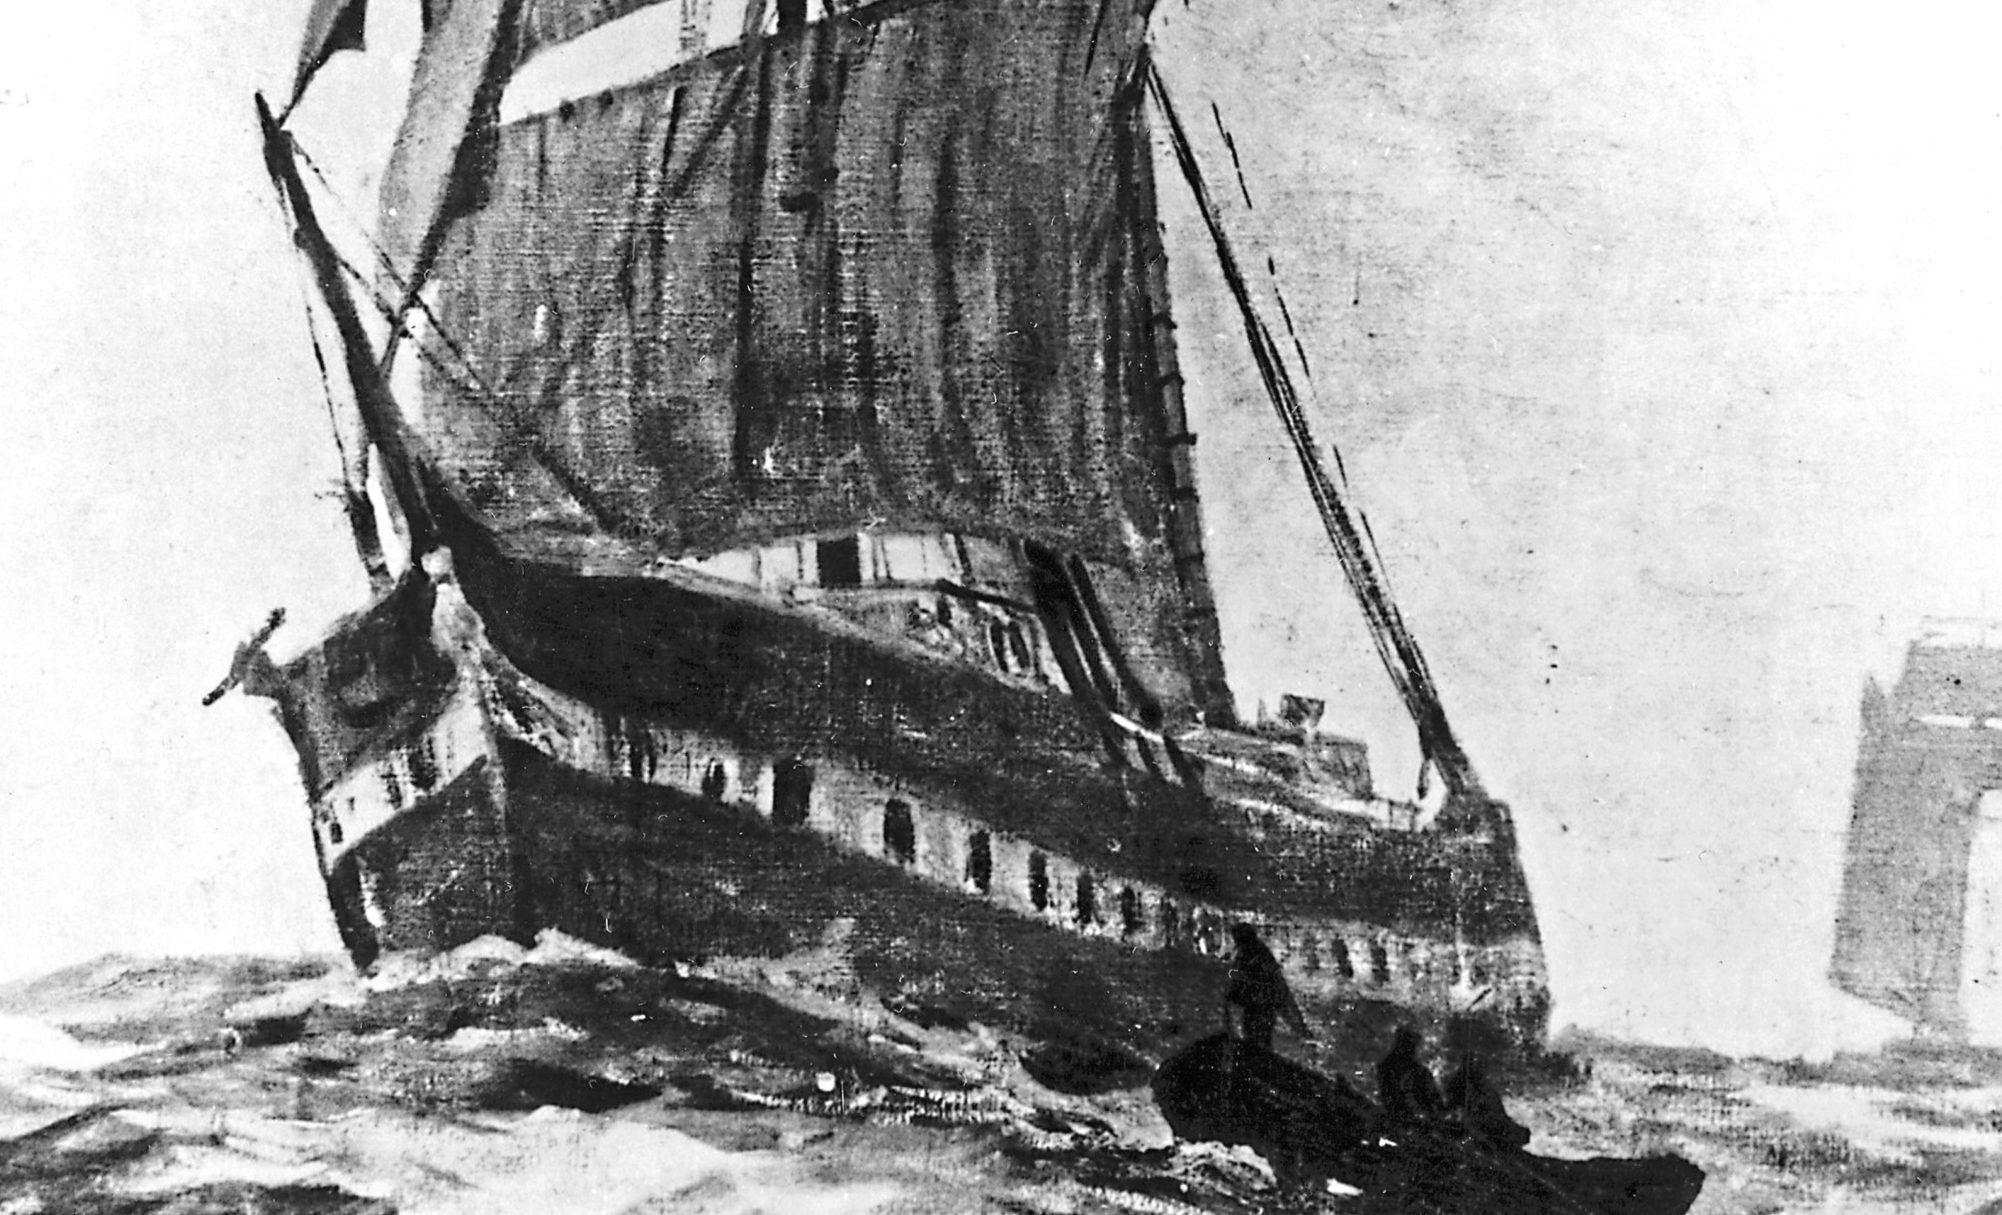 The mystery of the Mary Celeste has baffled people for over 140 years (DeAgostini/Getty Images)